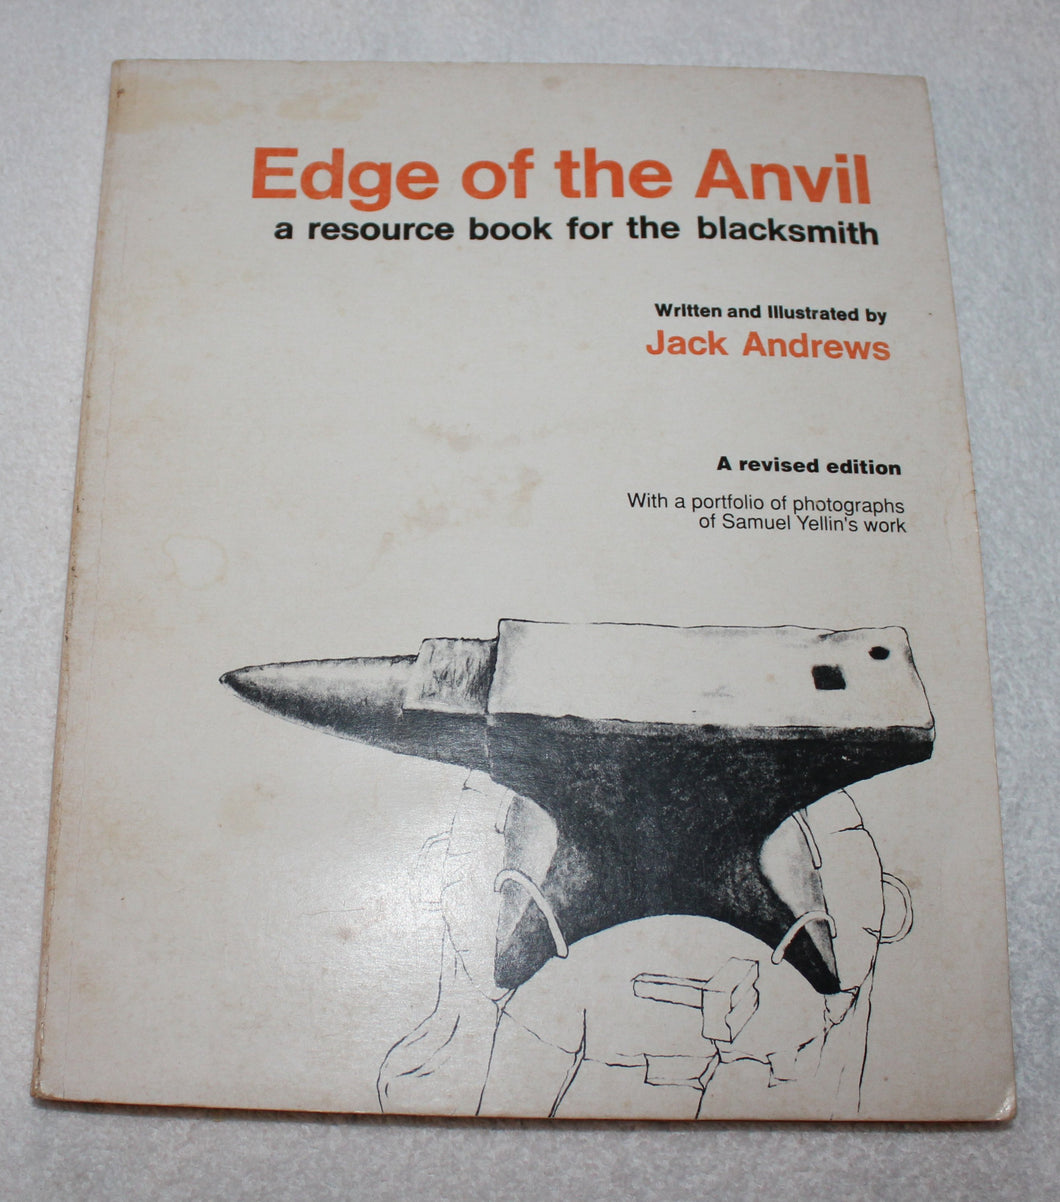 Edge of the Anvil : A Resource Book for the Blacksmith by Jack Andrews